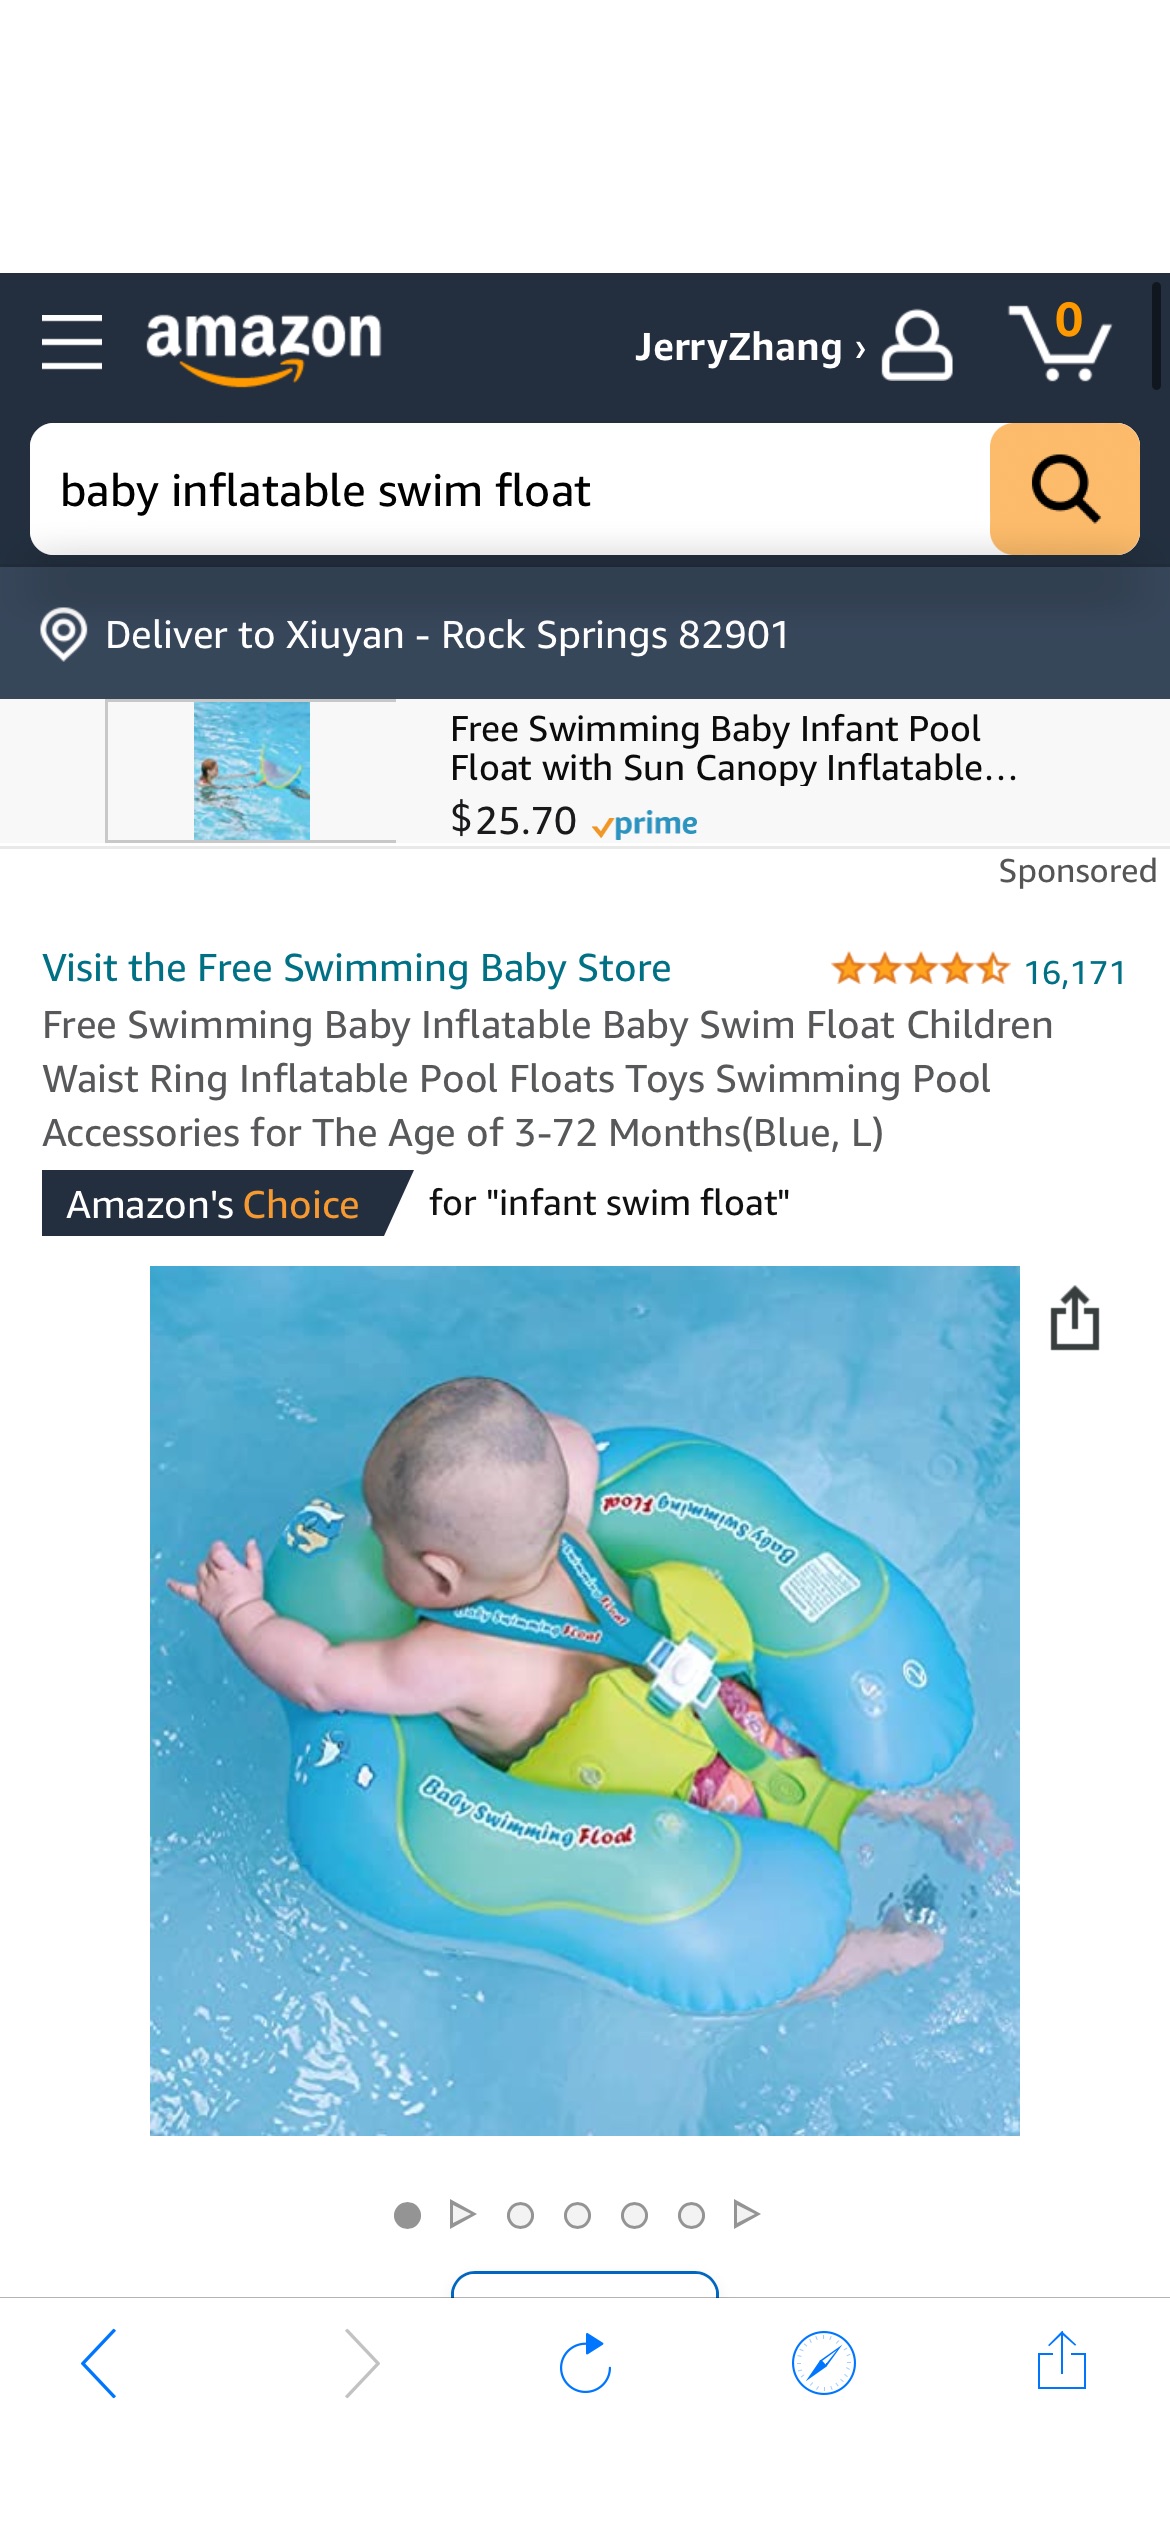 Amazon.com: Free Swimming Baby Inflatable Baby Swim Float Children Waist Ring Inflatable Pool Floats Toys Swimming Pool Accessories for The Age of 3-72 Months(Blue, L) : Toys & Games婴儿游泳圈